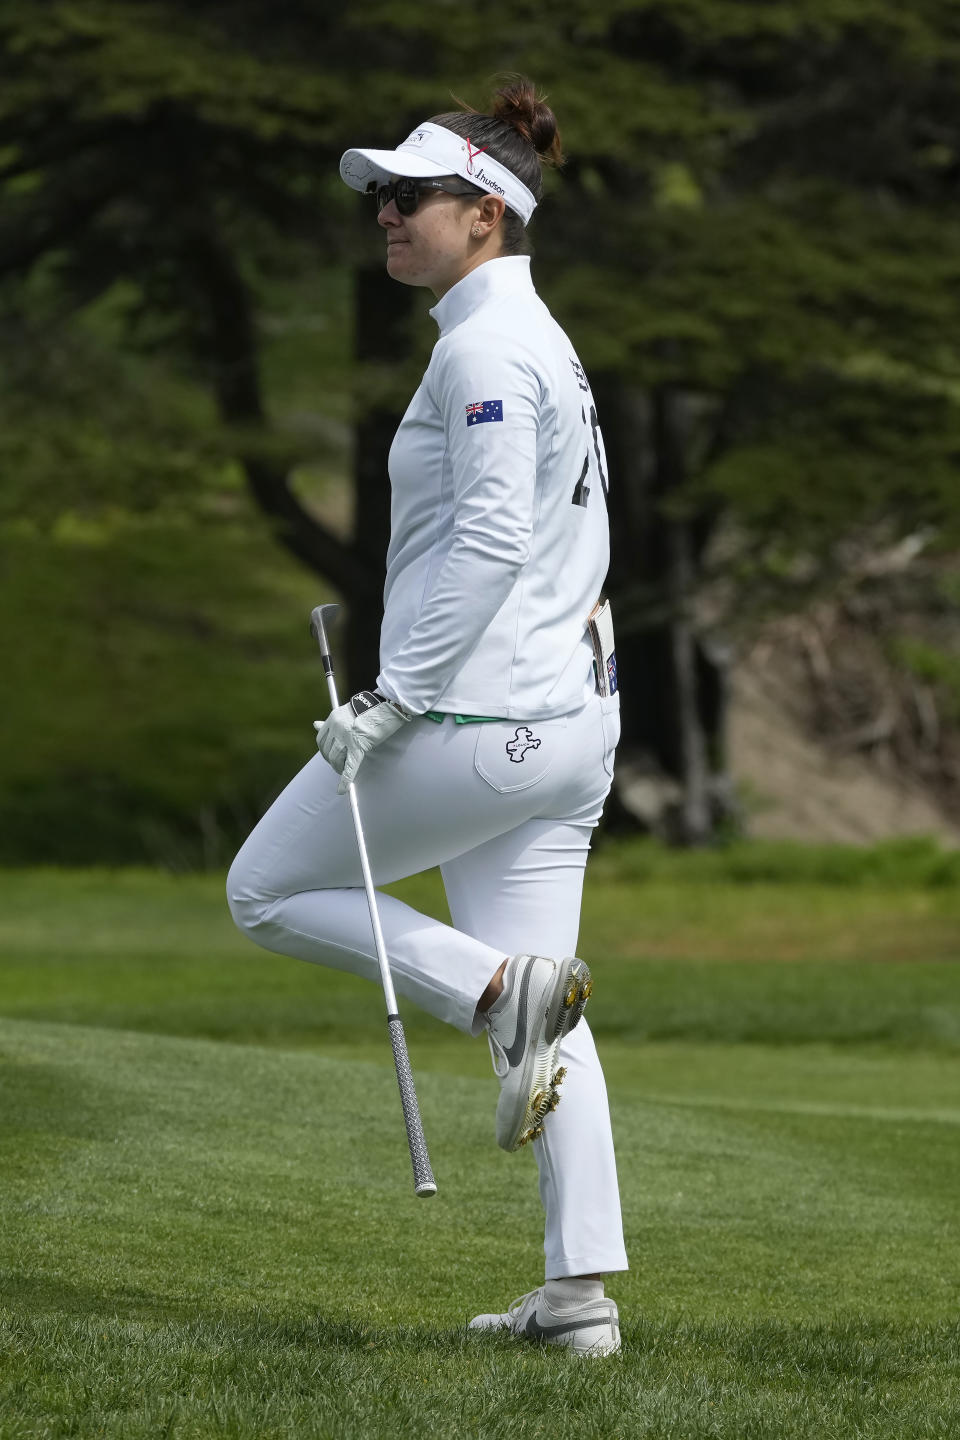 Australia's Hannah Green watches her shot toward the 11th hole at the International Crown match play golf tournament in San Francisco, Thursday, May 4, 2023. (AP Photo/Jeff Chiu)